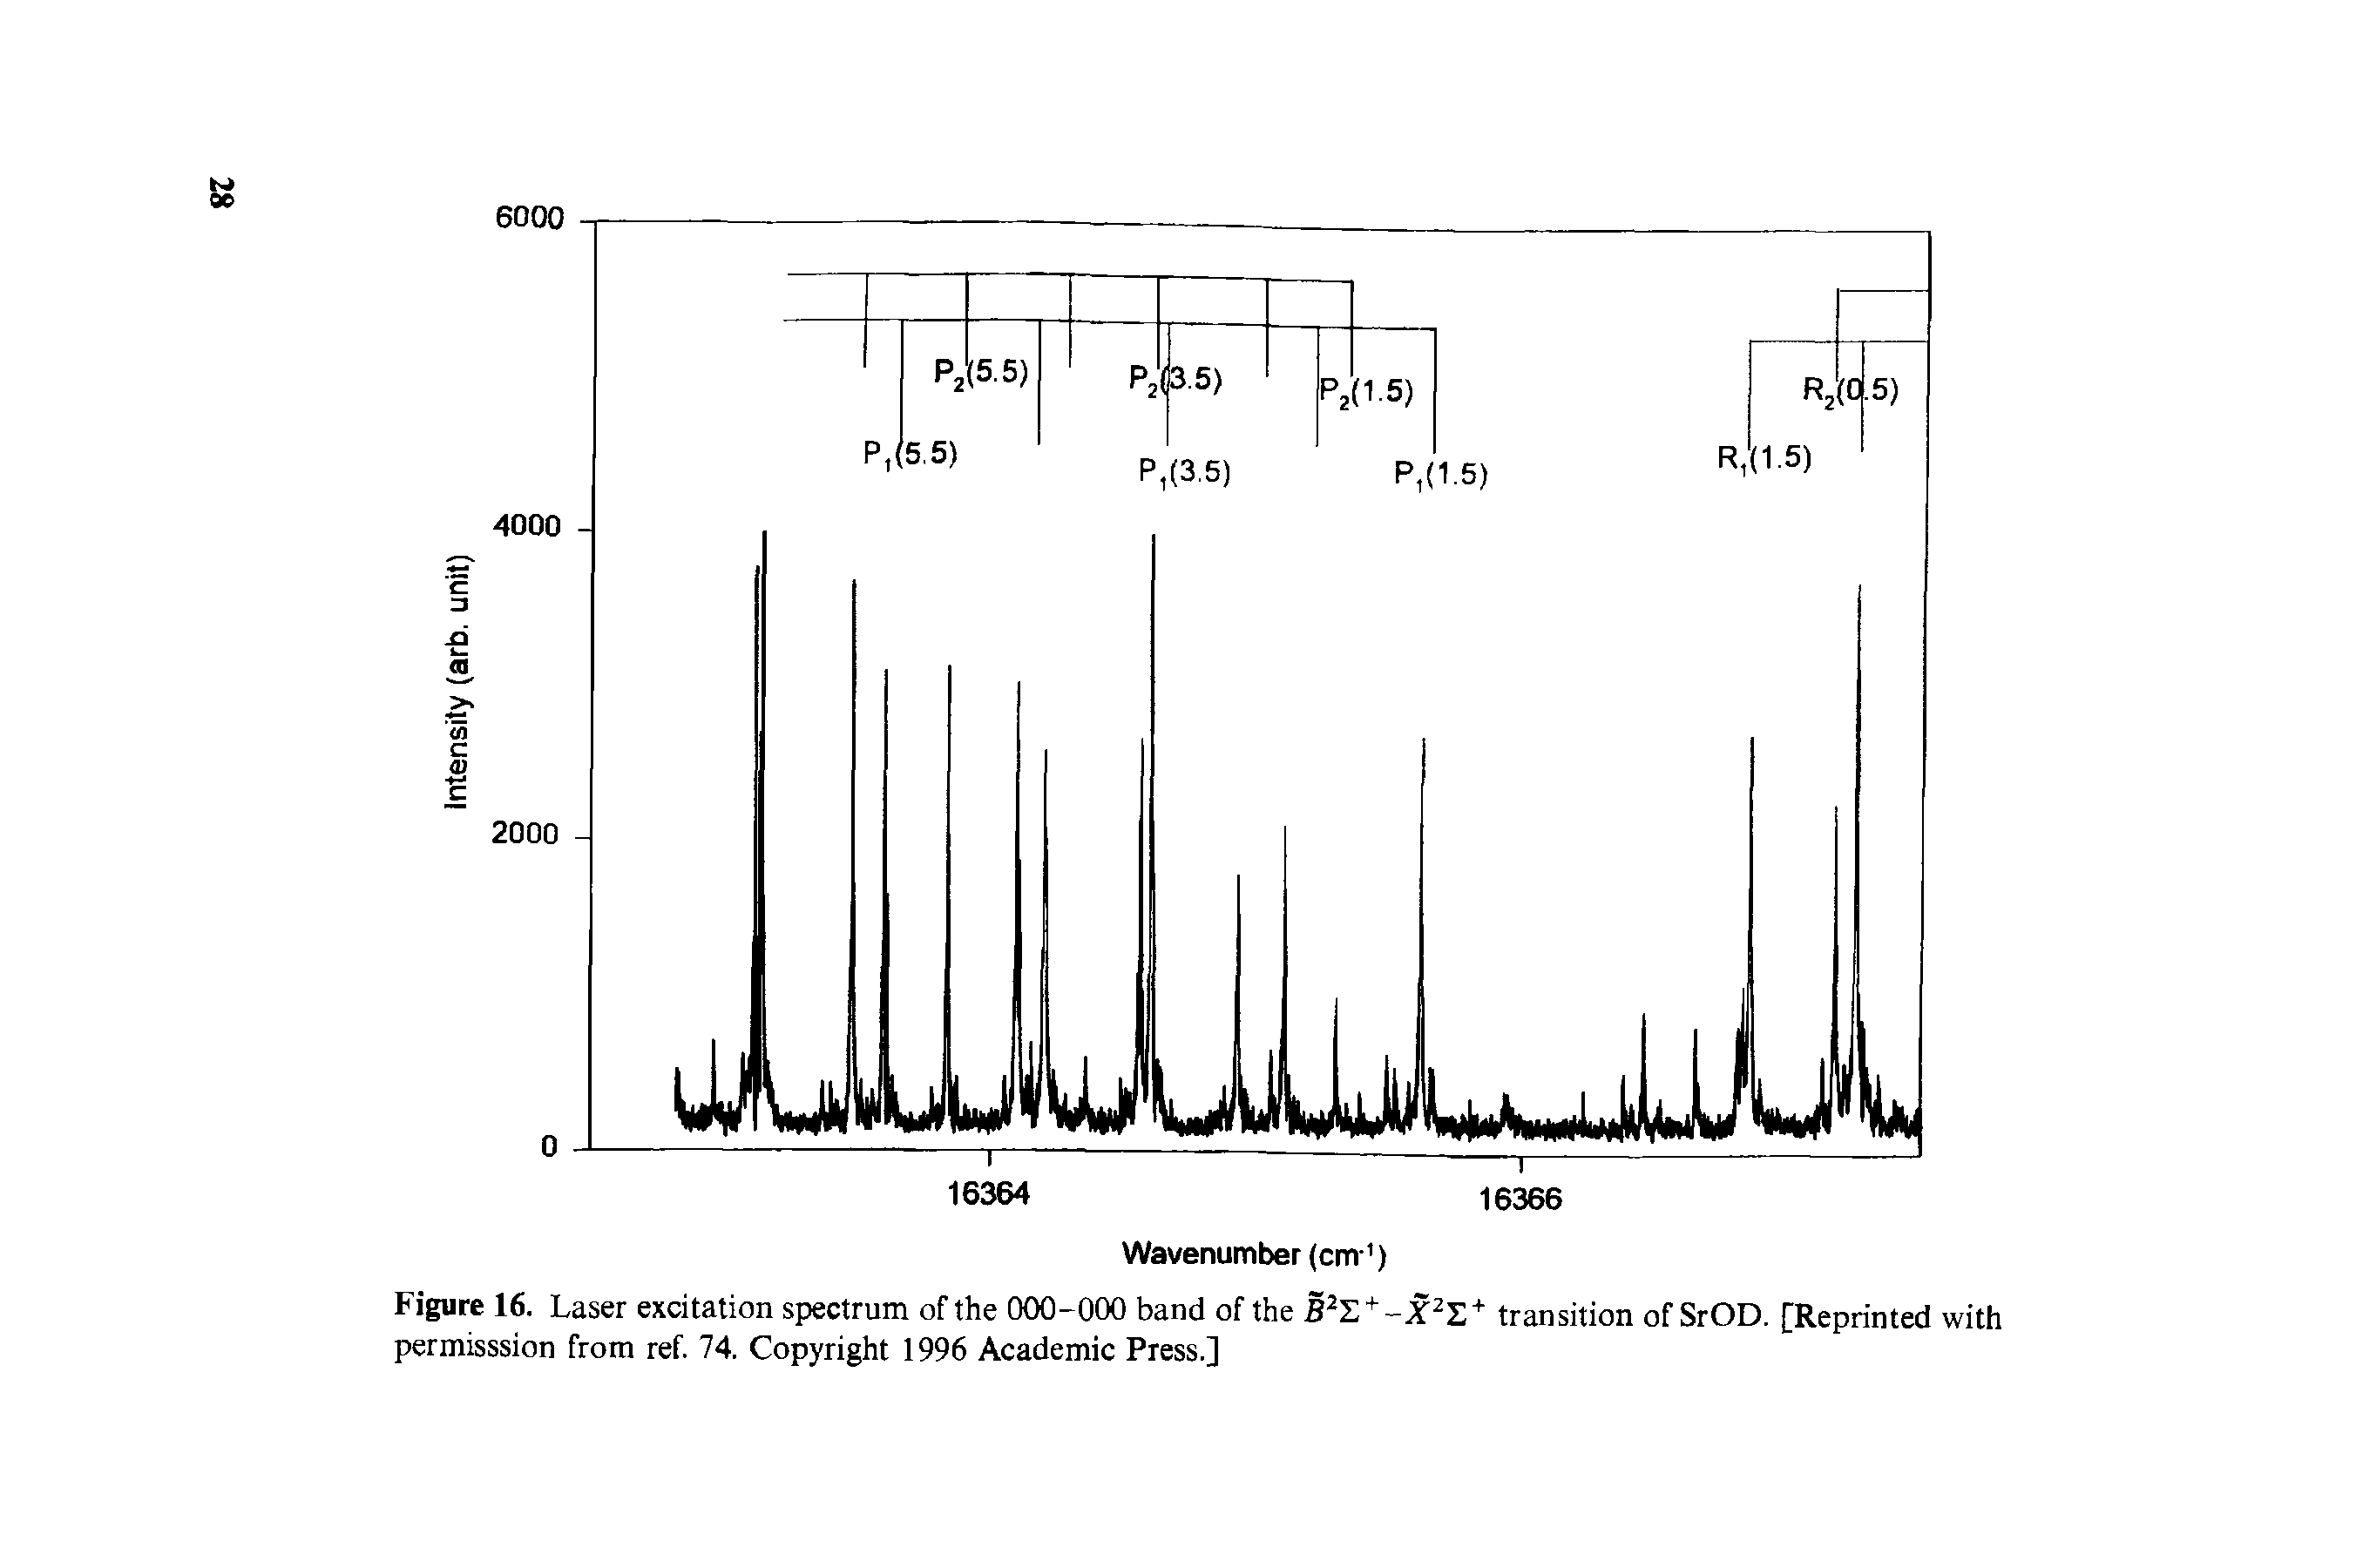 Figure 16. Laser excitation spectrum of the 000-000 band of the B22 + -X2S+ transition of SrOD. [Reprinted with permisssion from ref. 74. Copyright 1996 Academic Press.]...